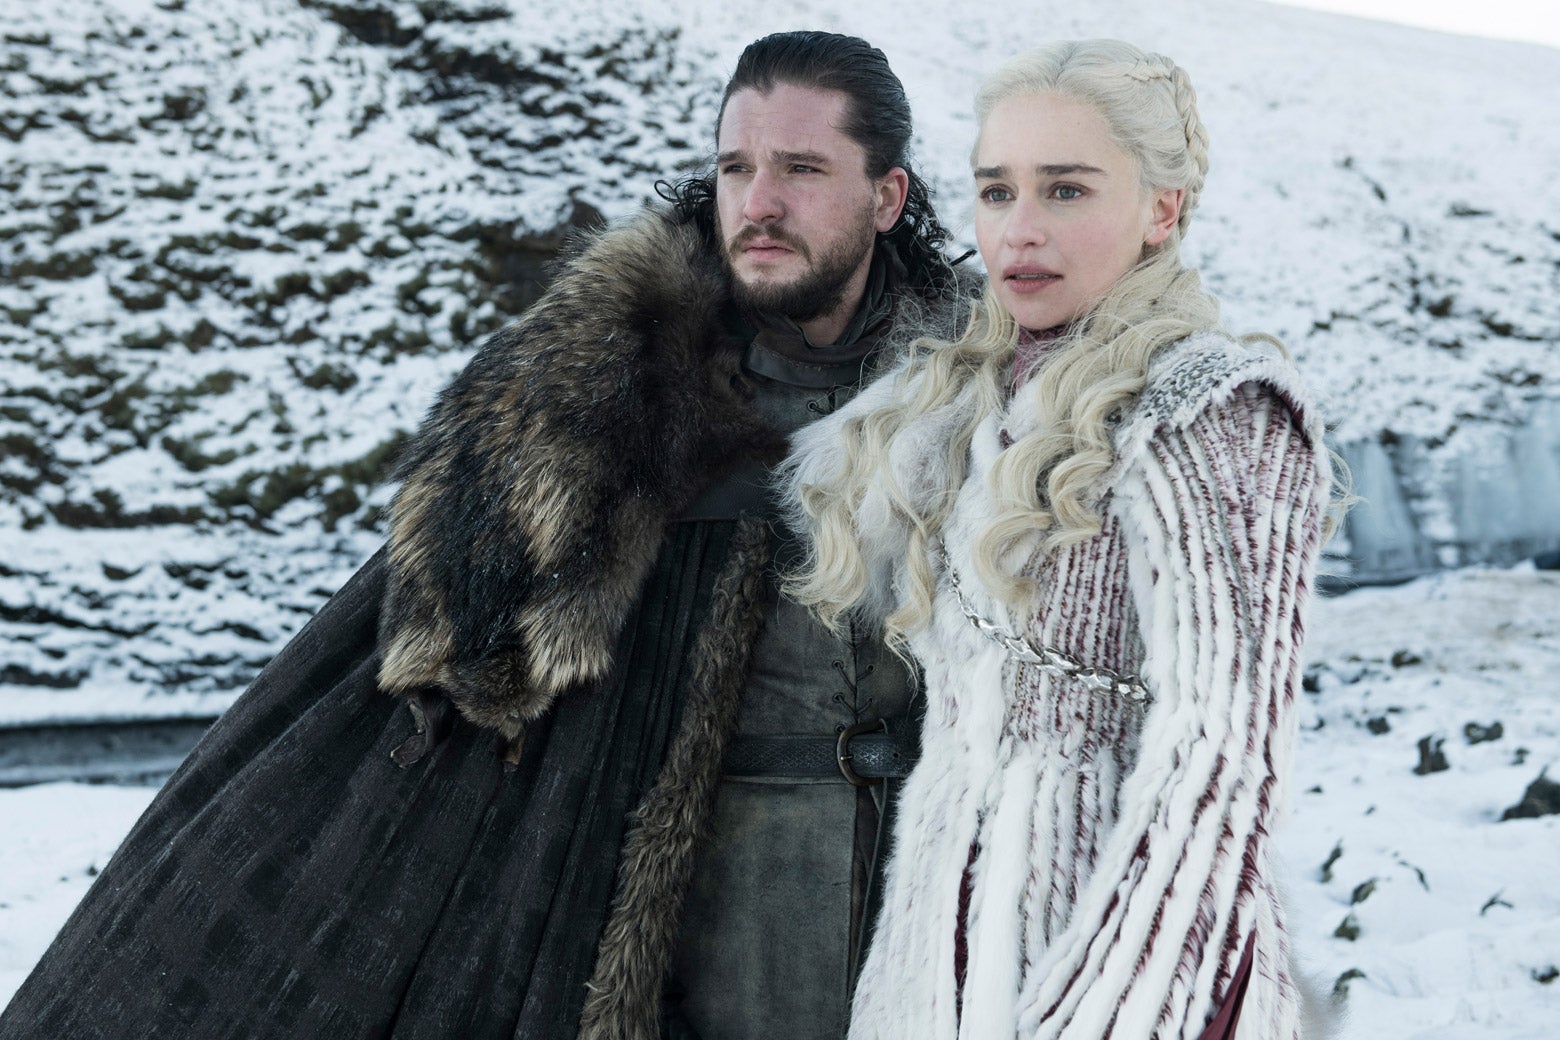 In a still from Game of Thrones, Jon Snow and Daenerys Targaryen stand beside each other in a snowy landscape.